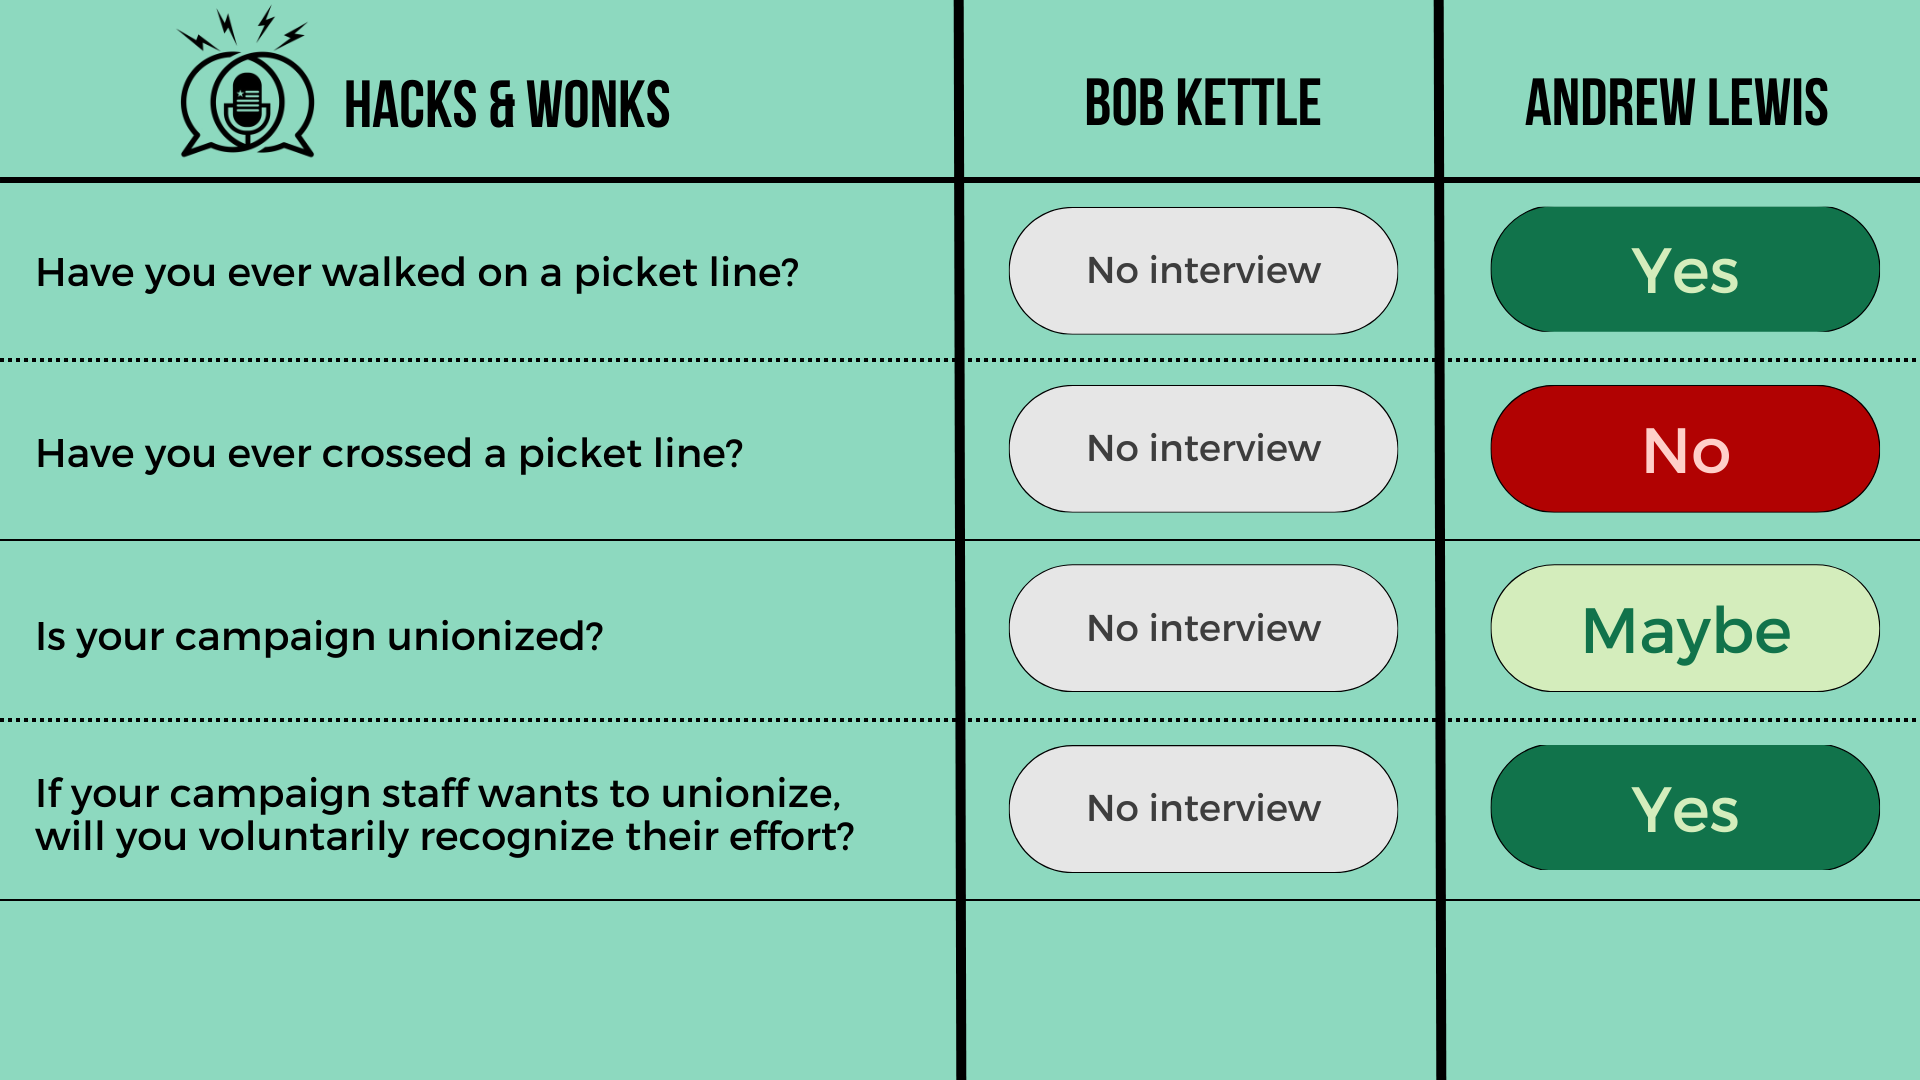 Q: Have you ever walked on a picket line? Bob Kettle: No interview, Andrew Lewis: Yes  Q: Have you ever crossed a picket line? Bob Kettle: No interview, Andrew Lewis: No  Q: Is your campaign unionized? Bob Kettle: No interview, Andrew Lewis: Maybe  Q